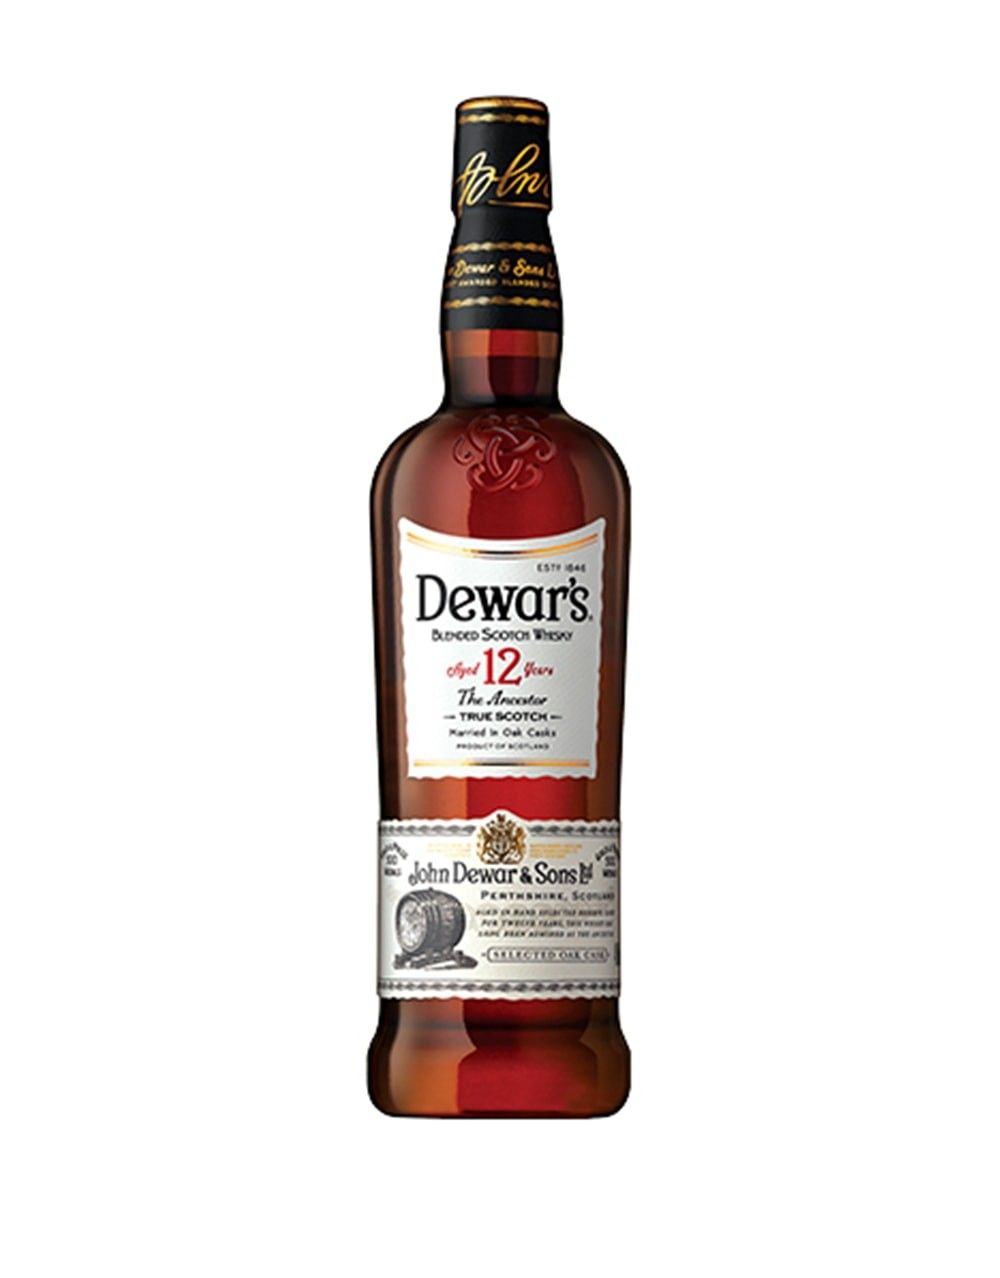 DEWAR’S 12 Year Old Scotch Whisky | Buy Online or Send as a Gift ...